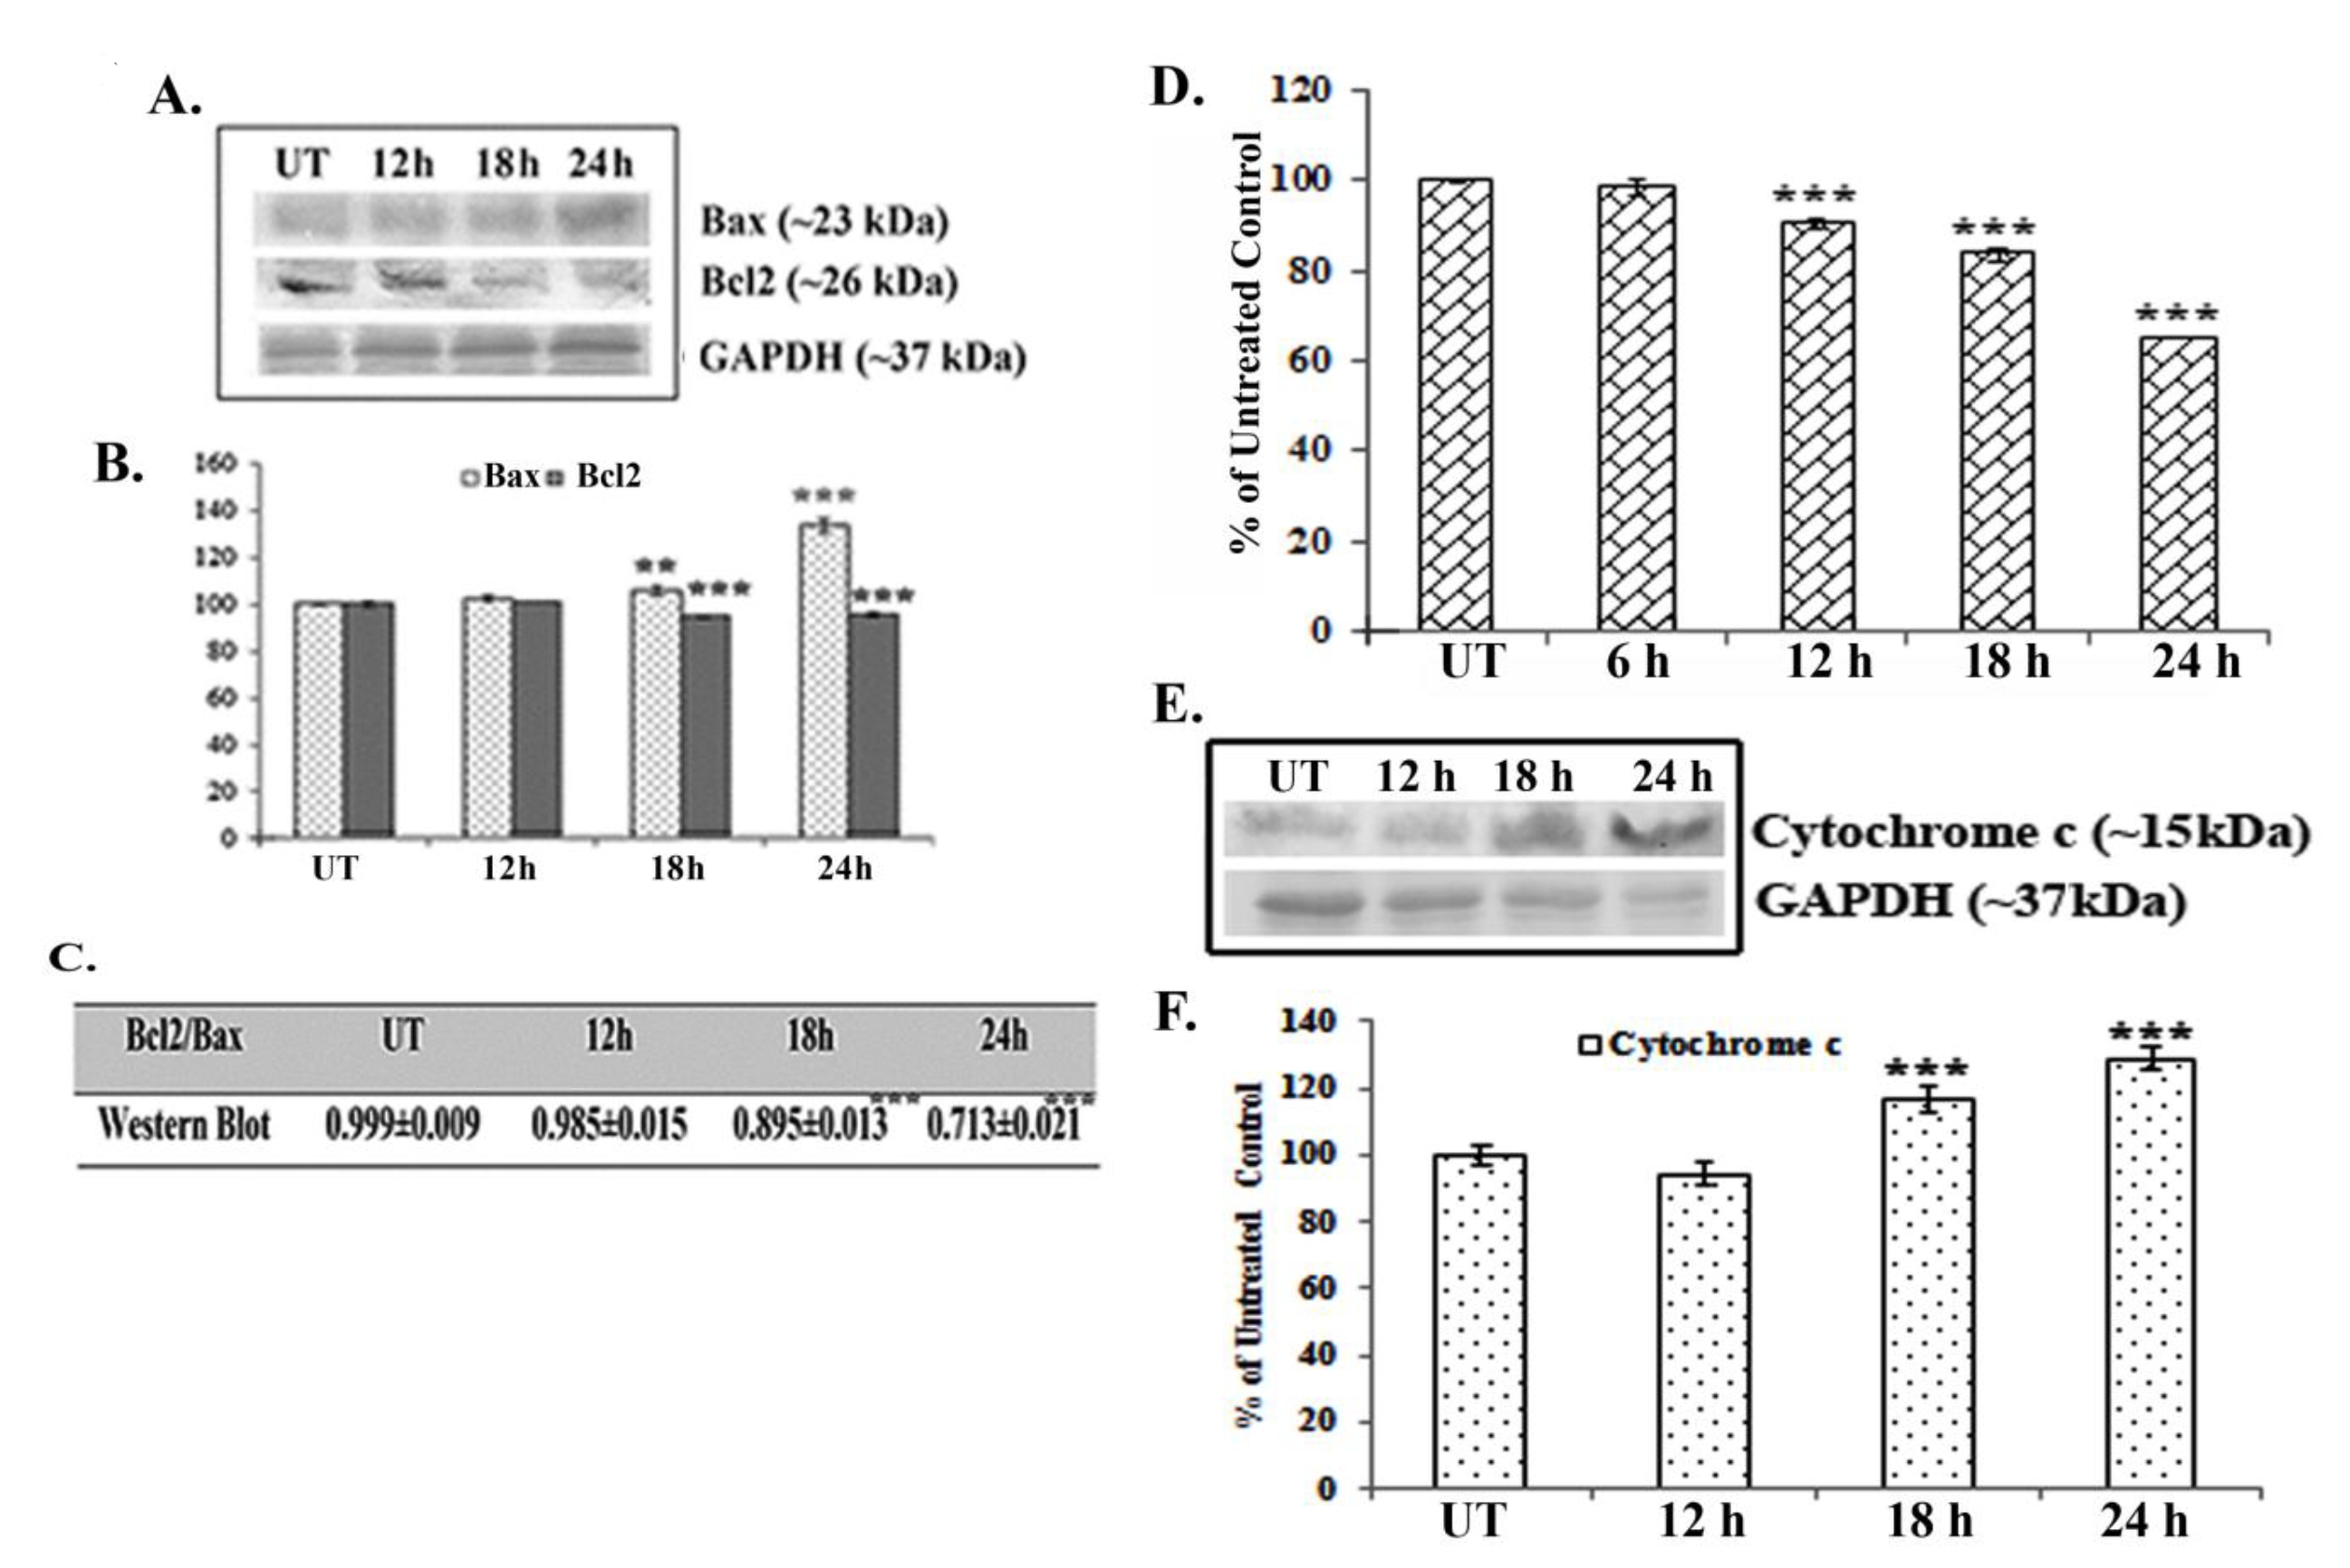 Analysis of Bax-Bcl2 expression and mitochondrial membrane potential after quercetin exposure. (A) Western blots of Bax and Bcl2 and (B) band intensities of Bax and Bcl2 were observed. Statistical significance was considered as *P < 0.01 or †P < 0.001. (C) The ratio of Bax to Bcl2 was determined. Statistical significance was considered as †P < 0.001. (D) Flu FluorimetryFluorometric analysis of the mitochondrial membrane potential after staining with rhodamine 123. Values are means ± SDs of three independent experiments with six replicates each. Statistical significance was considered as †P < 0.001. (E) Western blots of cytochrome c and GAPDH were done and (F) relative band intensities were calculated. Statistical significance was considered as †P < 0.001. Here, UT represents the untreated cells.